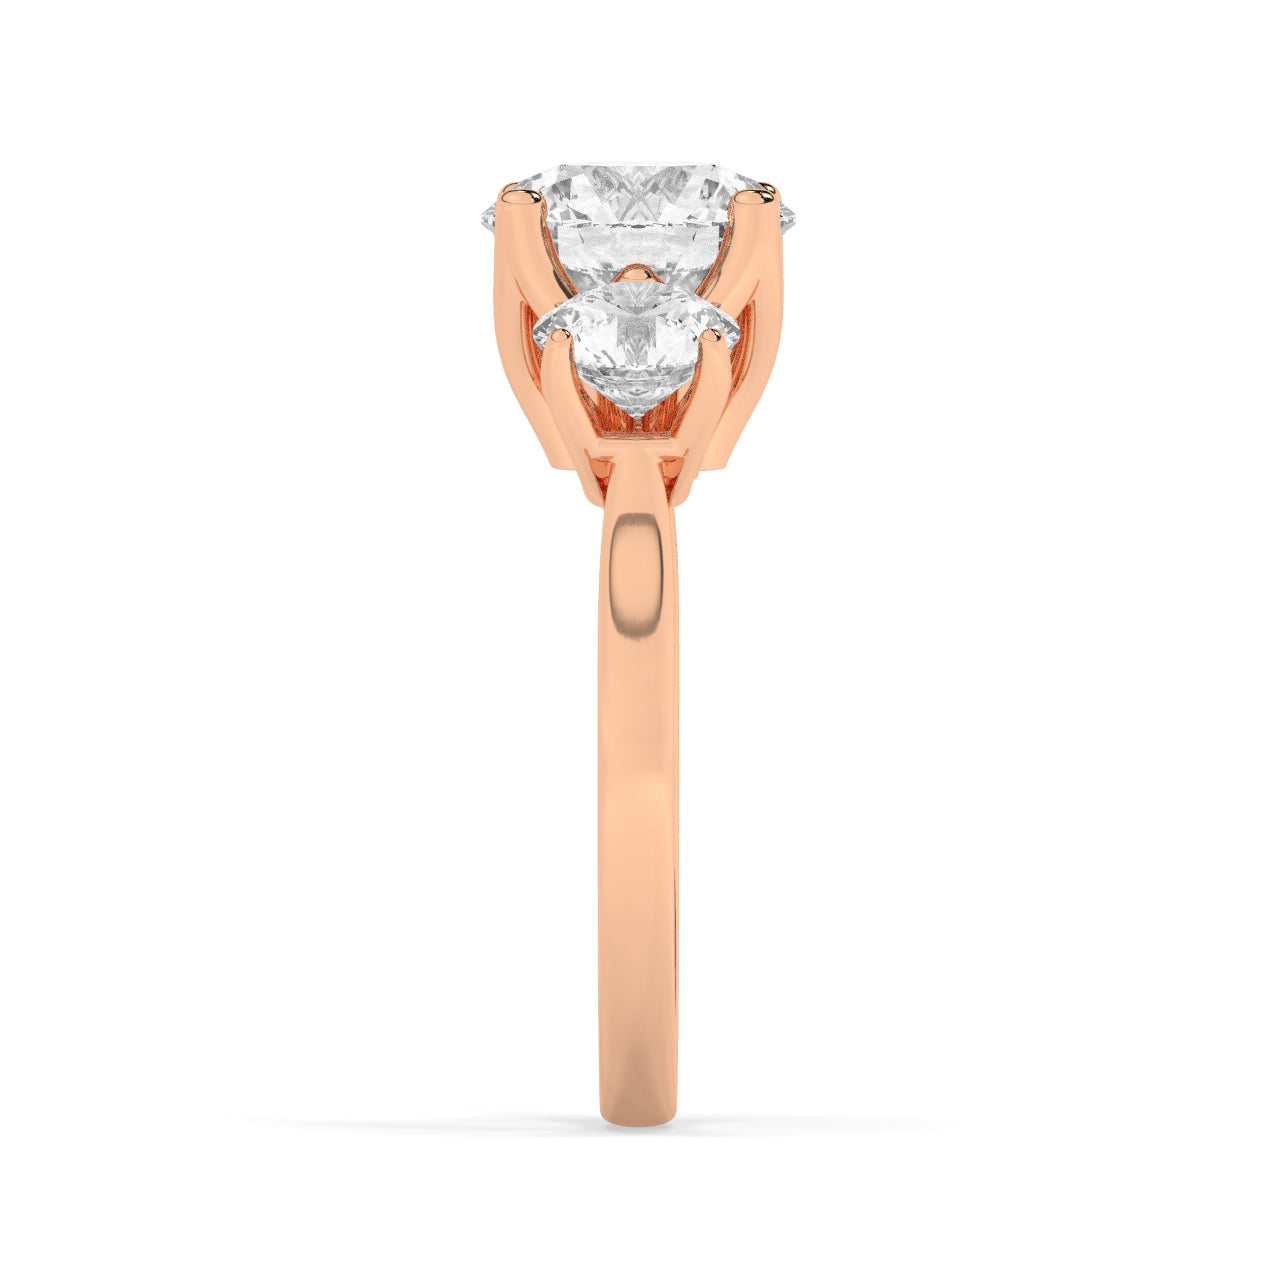 1 Ct Diamond Engagement Ring in Rose Gold